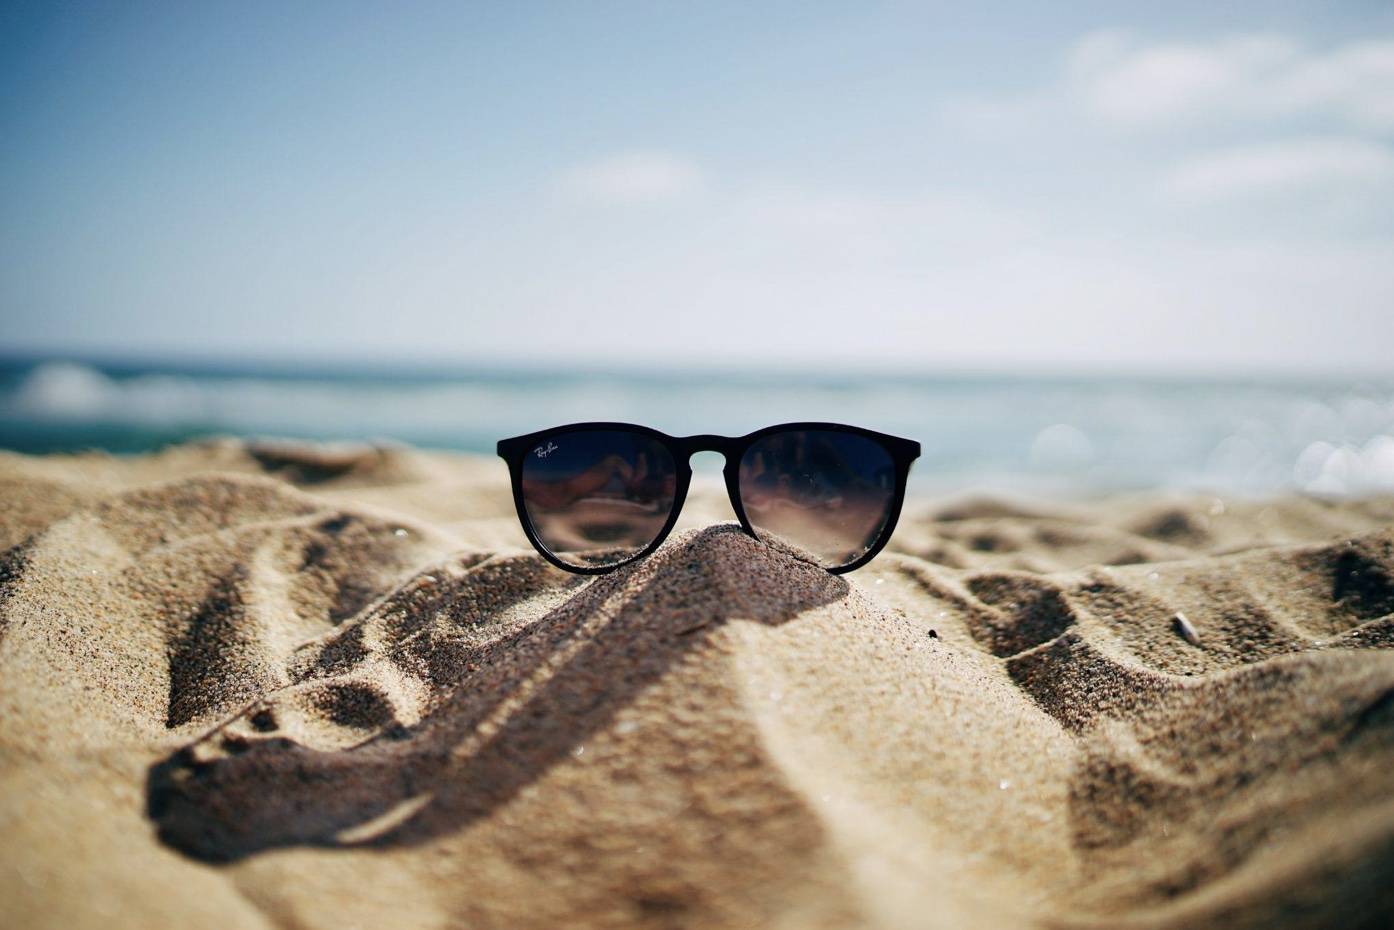  sunglasses on the beach: stay cool this summer